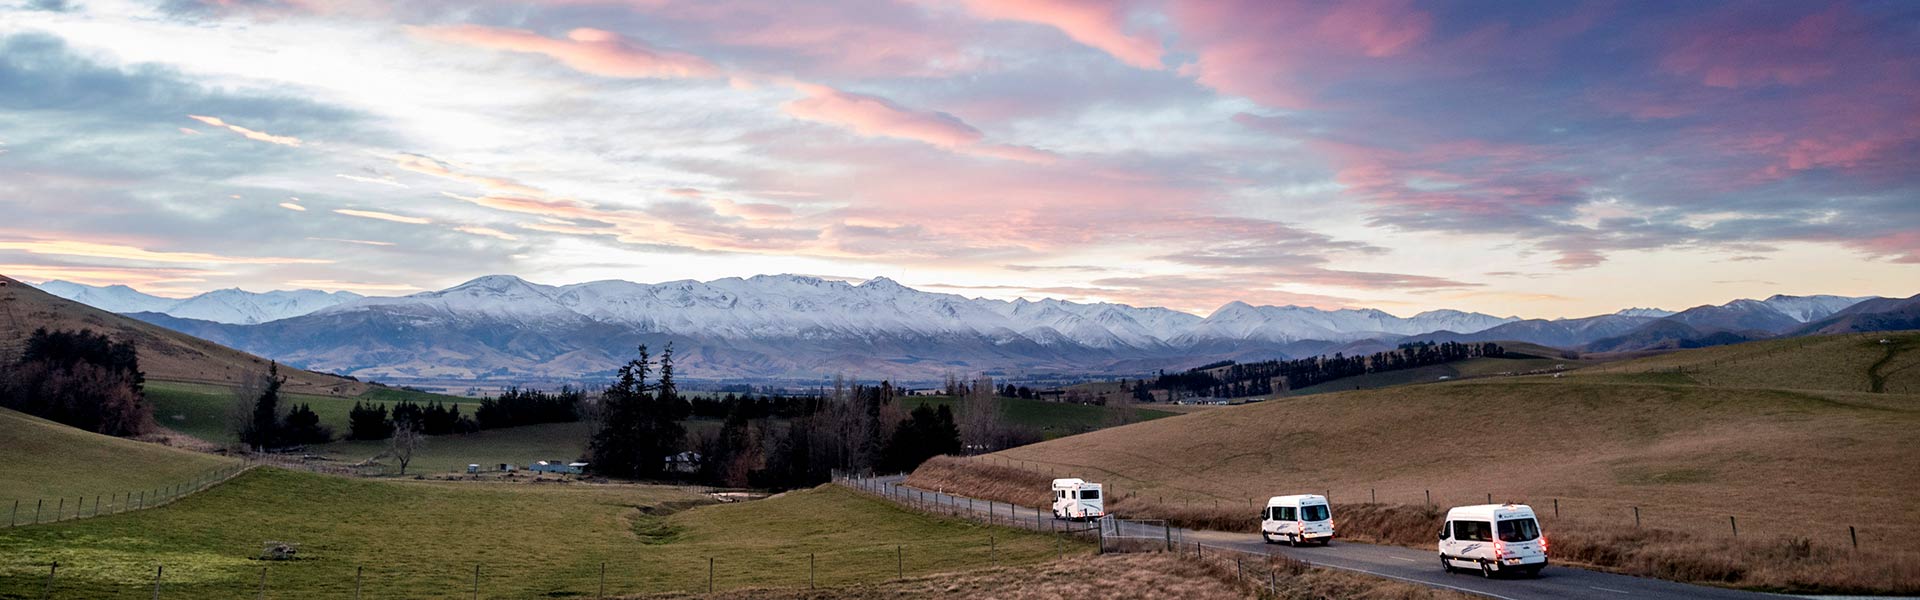 Apollo rental vehicles driving among New Zealand landscape at sunset